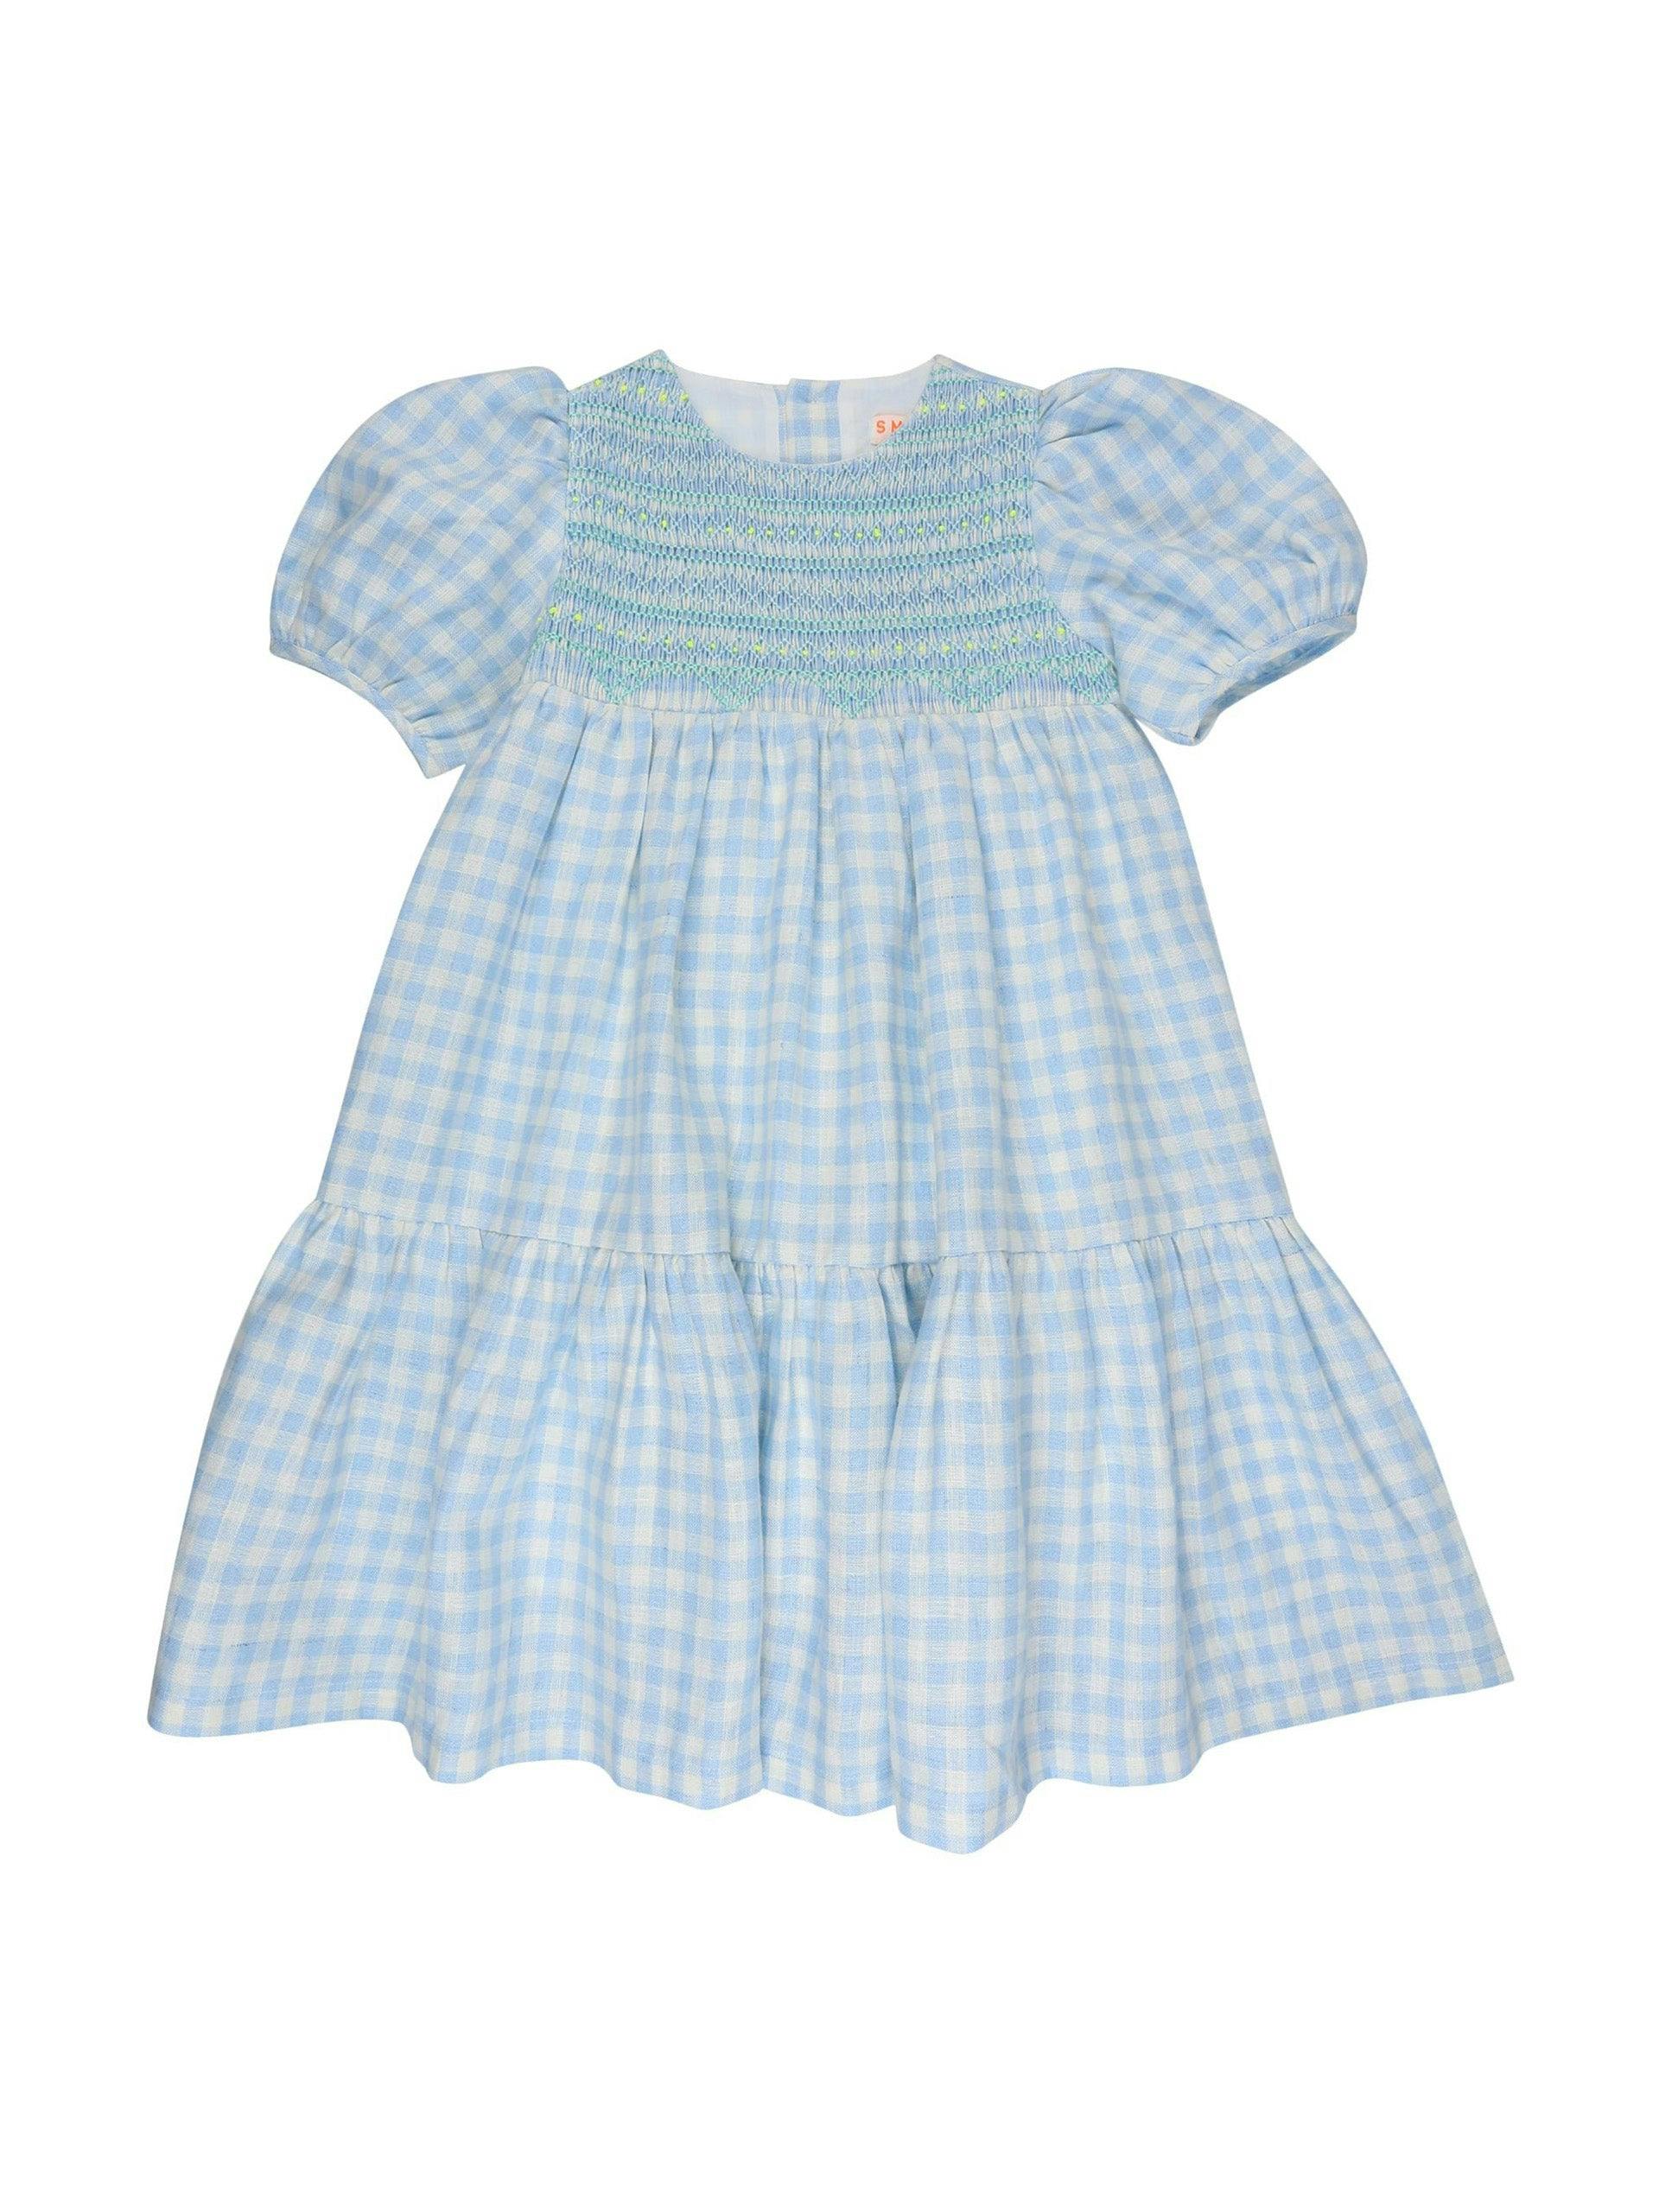 Margaret Graham dress in clear skies gingham with pineapple hand smocking